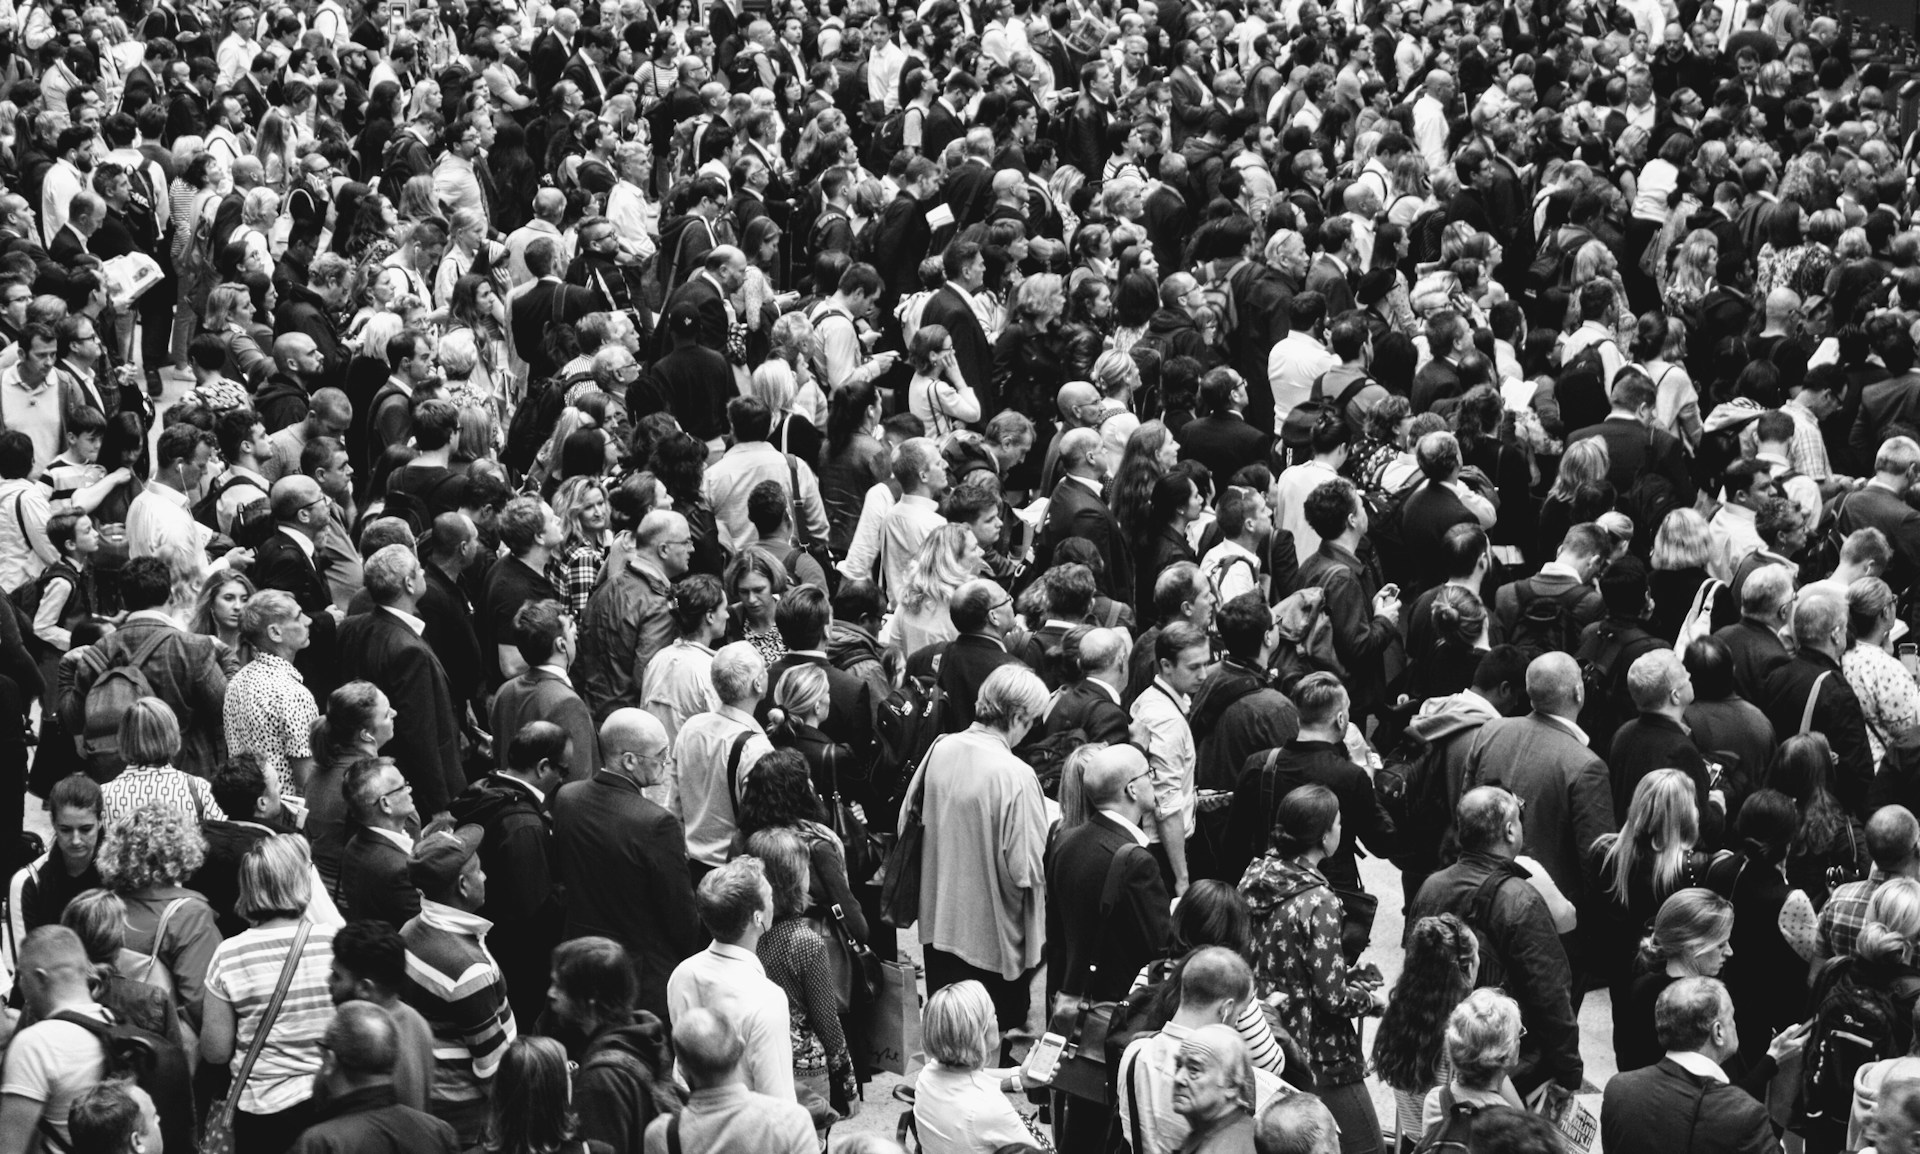 Black and white photo of a crowd of people, mainly facing in the same direction away from the camera.